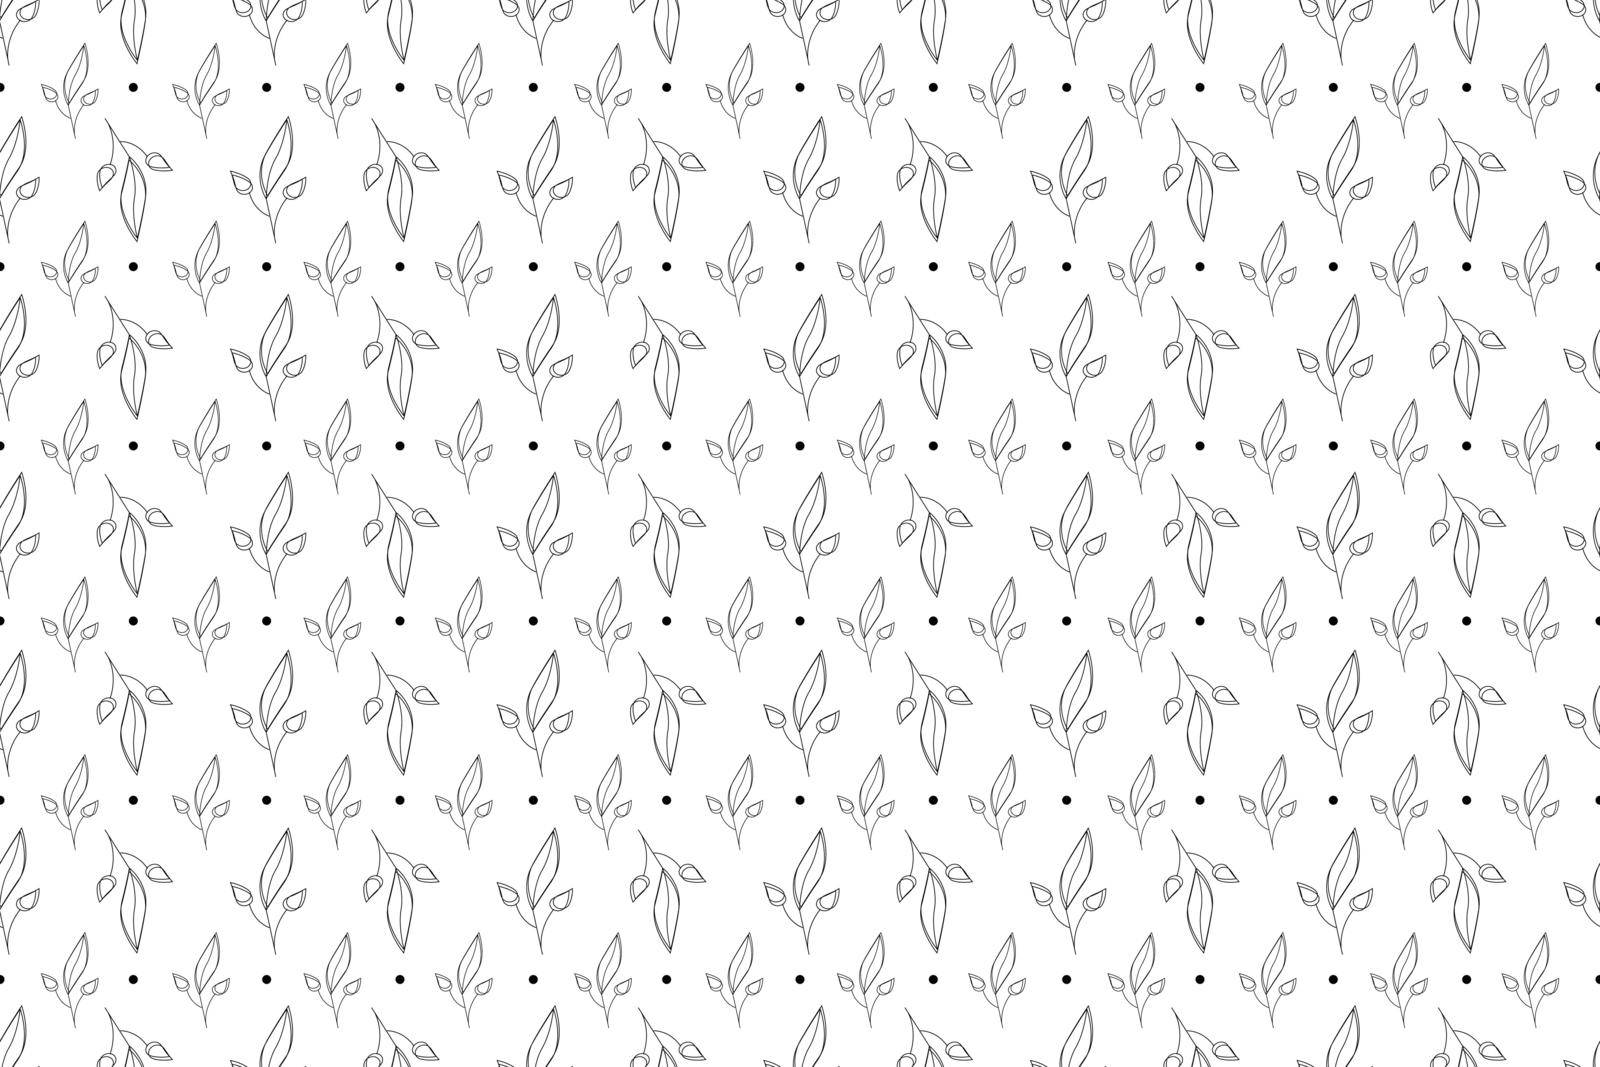 Hand drawn leaves meadow seamless pattern, lovely spring or summer background, great for textile and wallpapers. Endless leaves with monochrome design. Vector illustration.